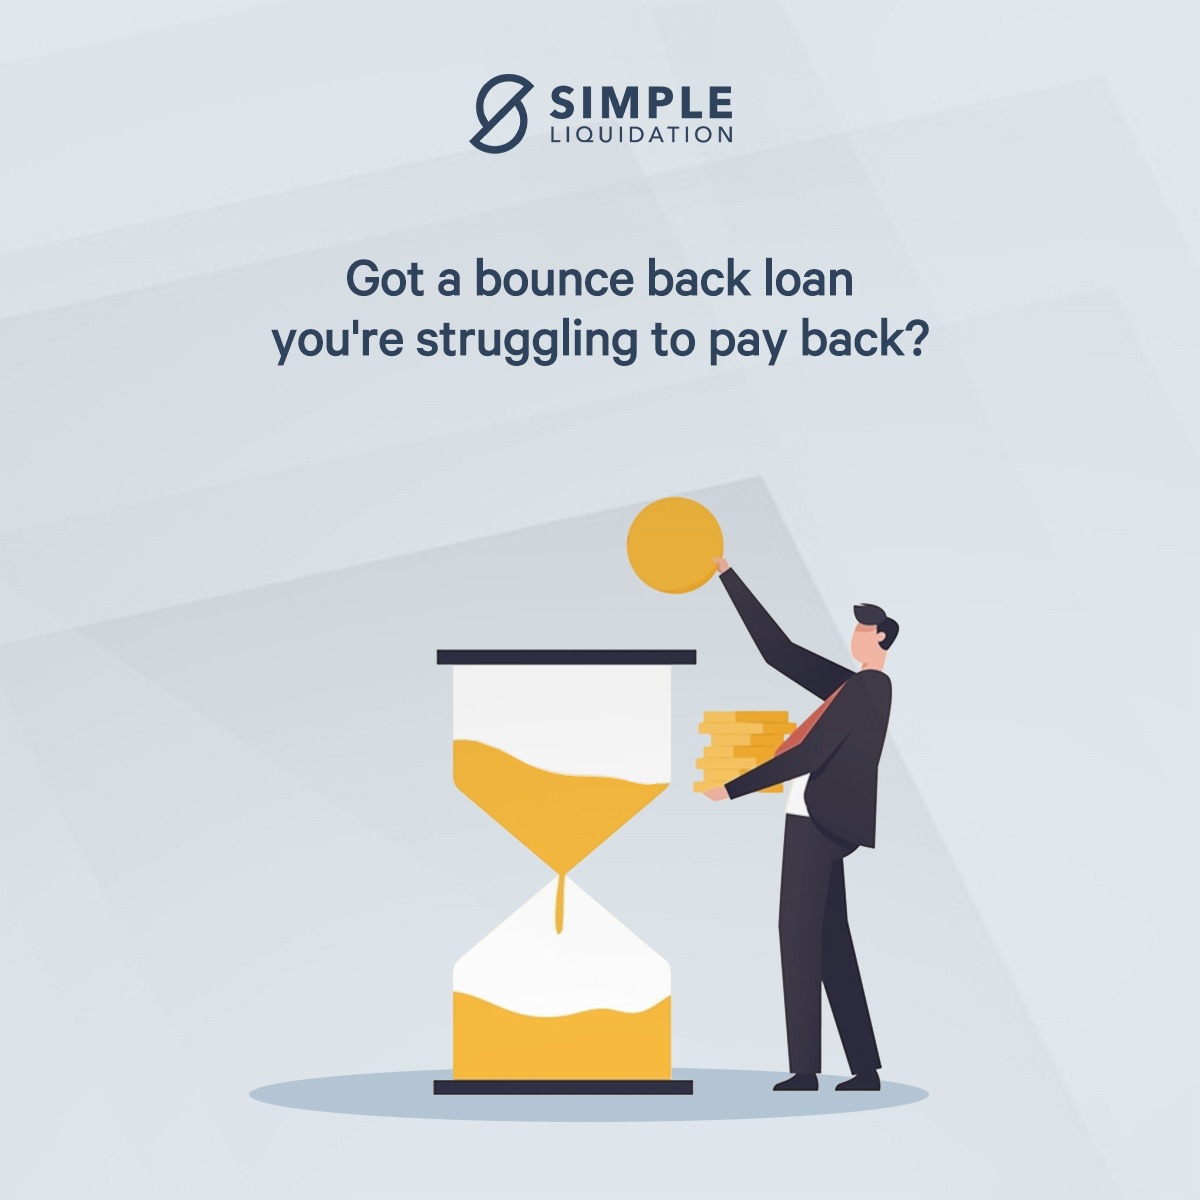 Have you got a bounce-back loan you're struggling to pay back?👇  

There are several exceptions where personal liability is applicable for bounce-back loans. Discover more in our blog post: bit.ly/3vPjKf8

#BusinessBounceBackLoan #BounceBackLoan #SmallBusiness